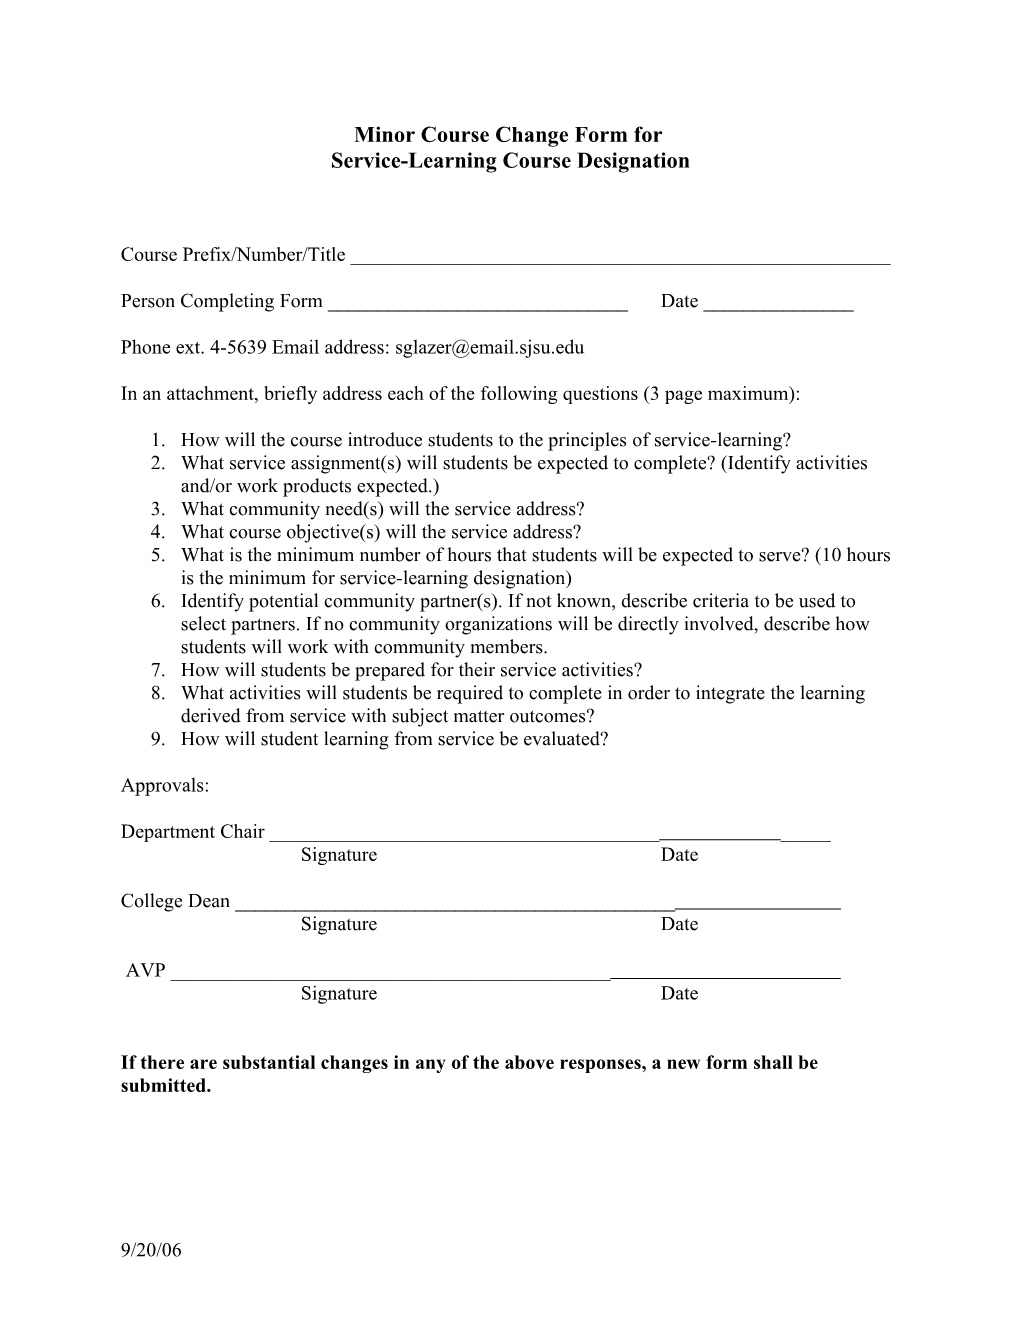 Minor Course Change Form For